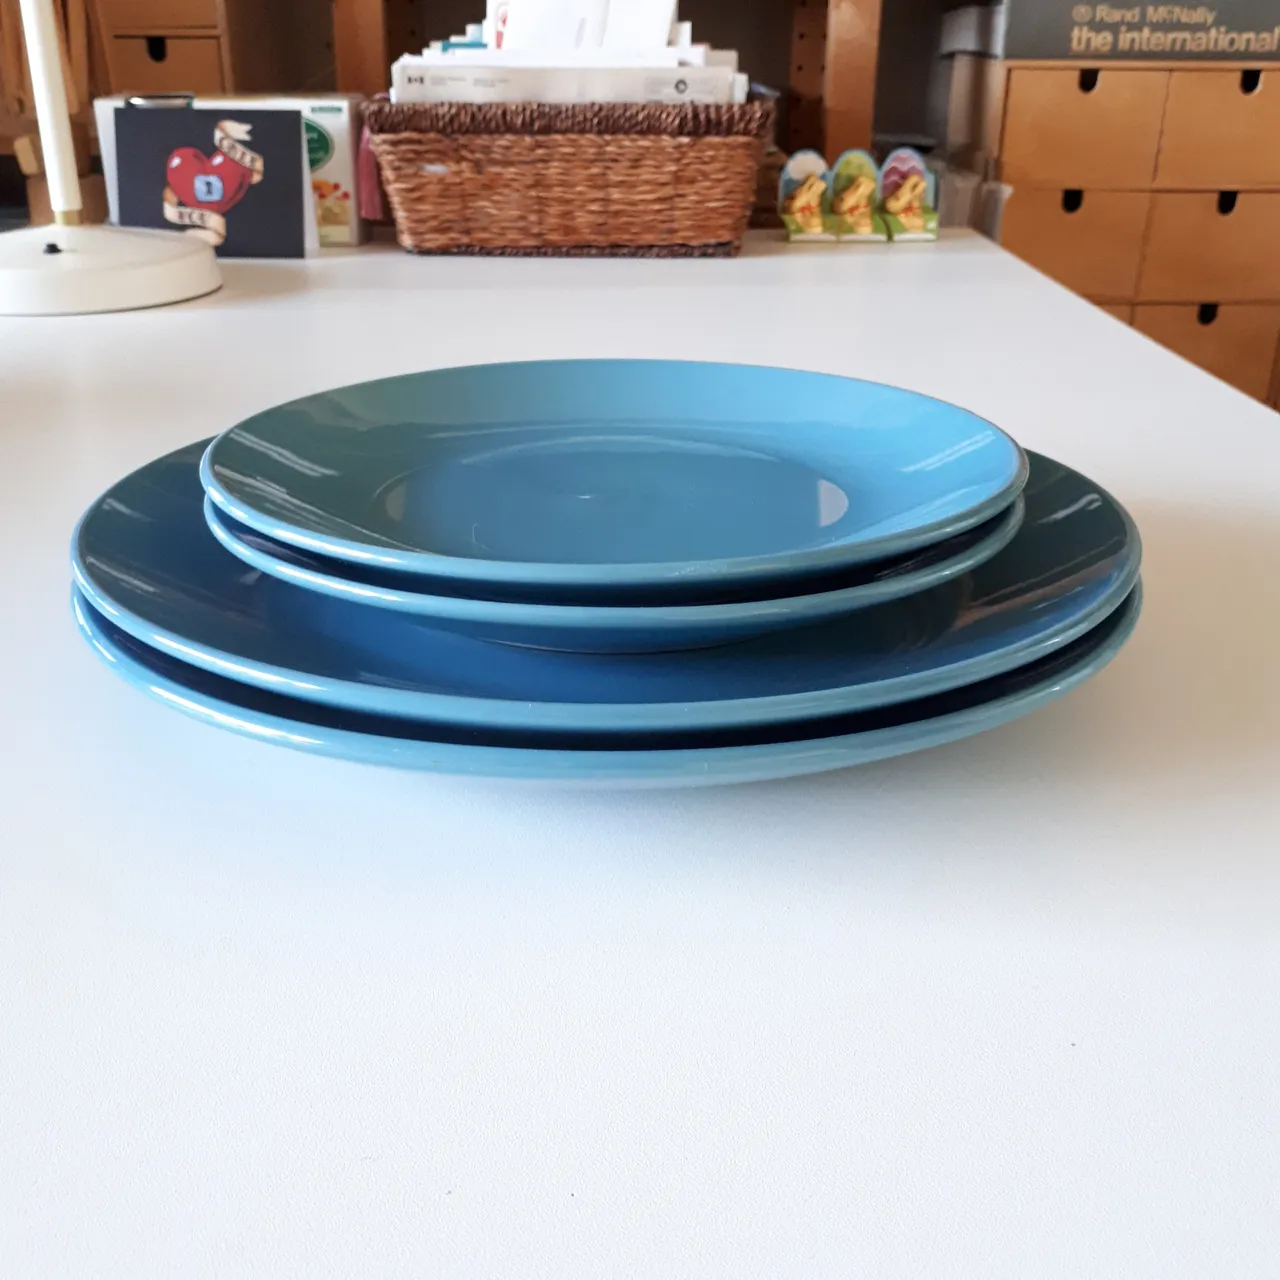 Plates (Turquoise / Teal) photo 2